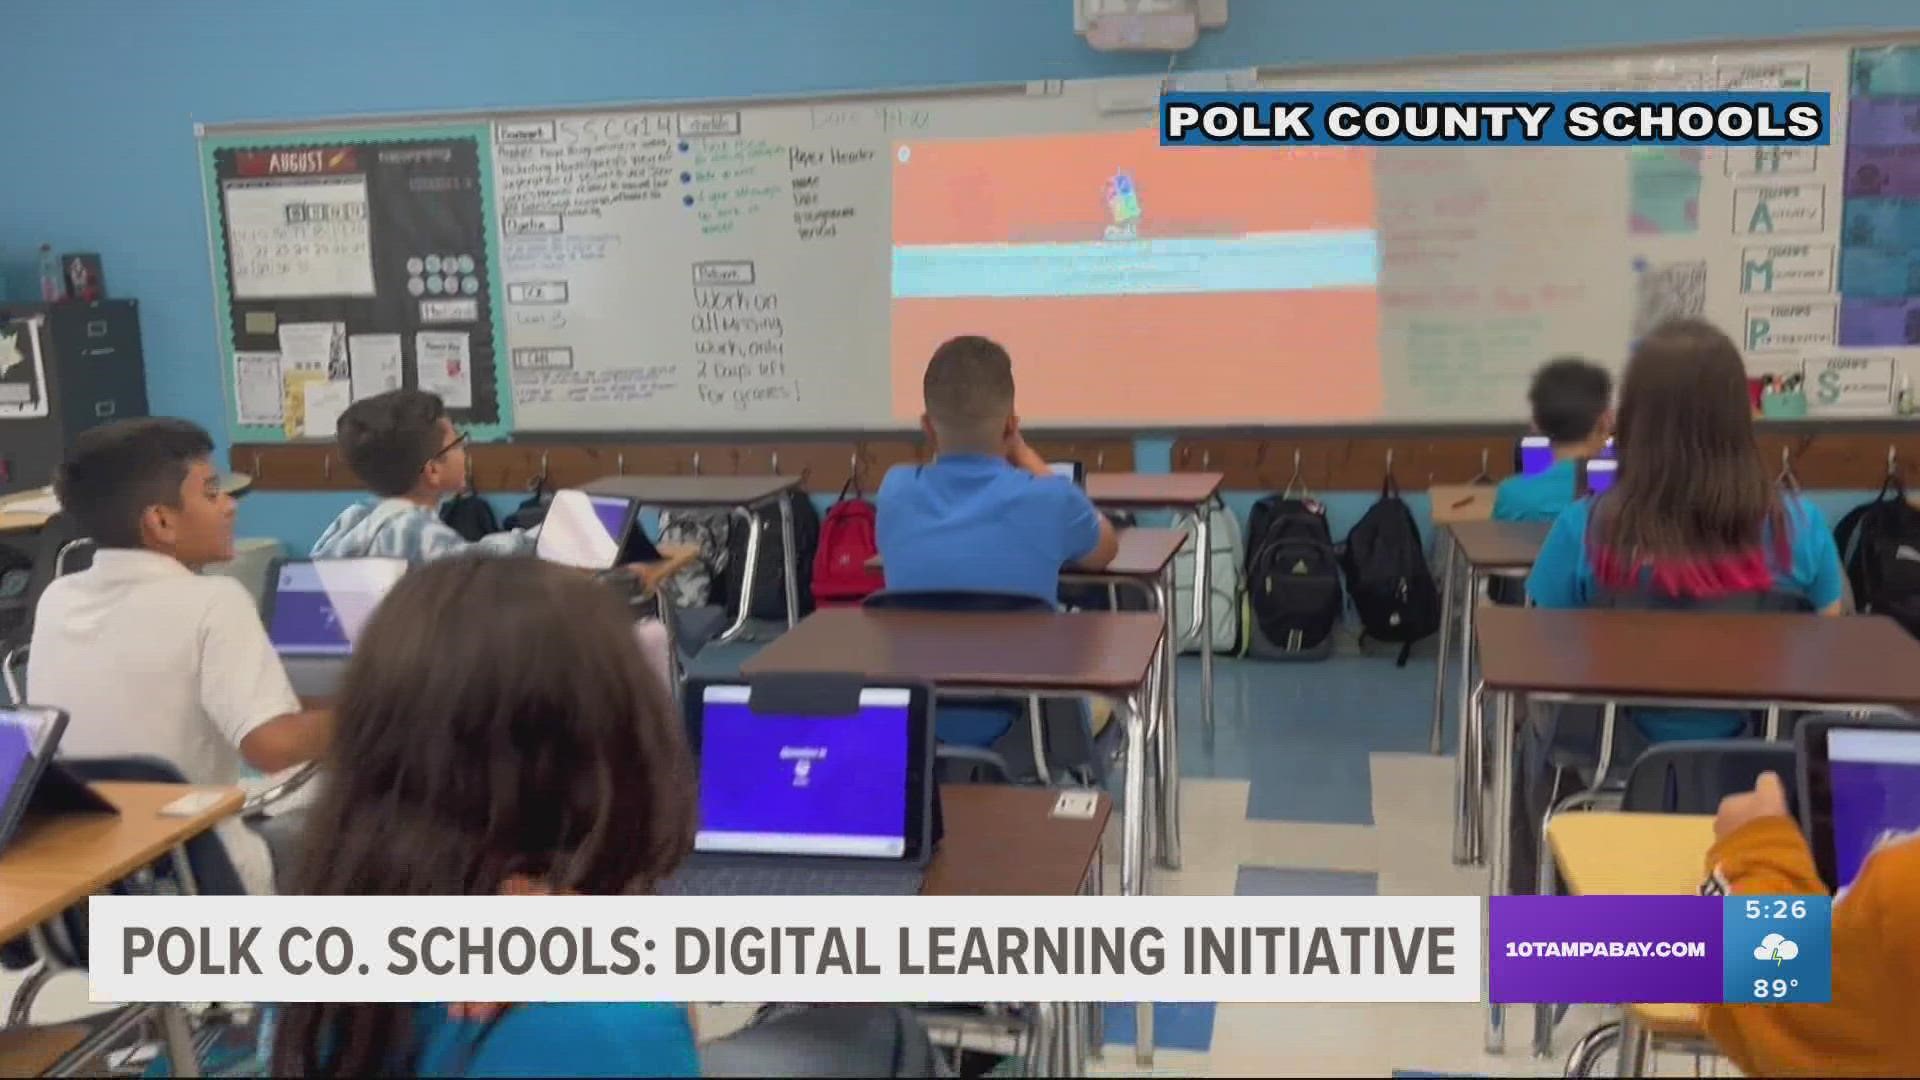 In a new digital initiative, all students in Polk County Schools will receive new technology in the next six weeks.